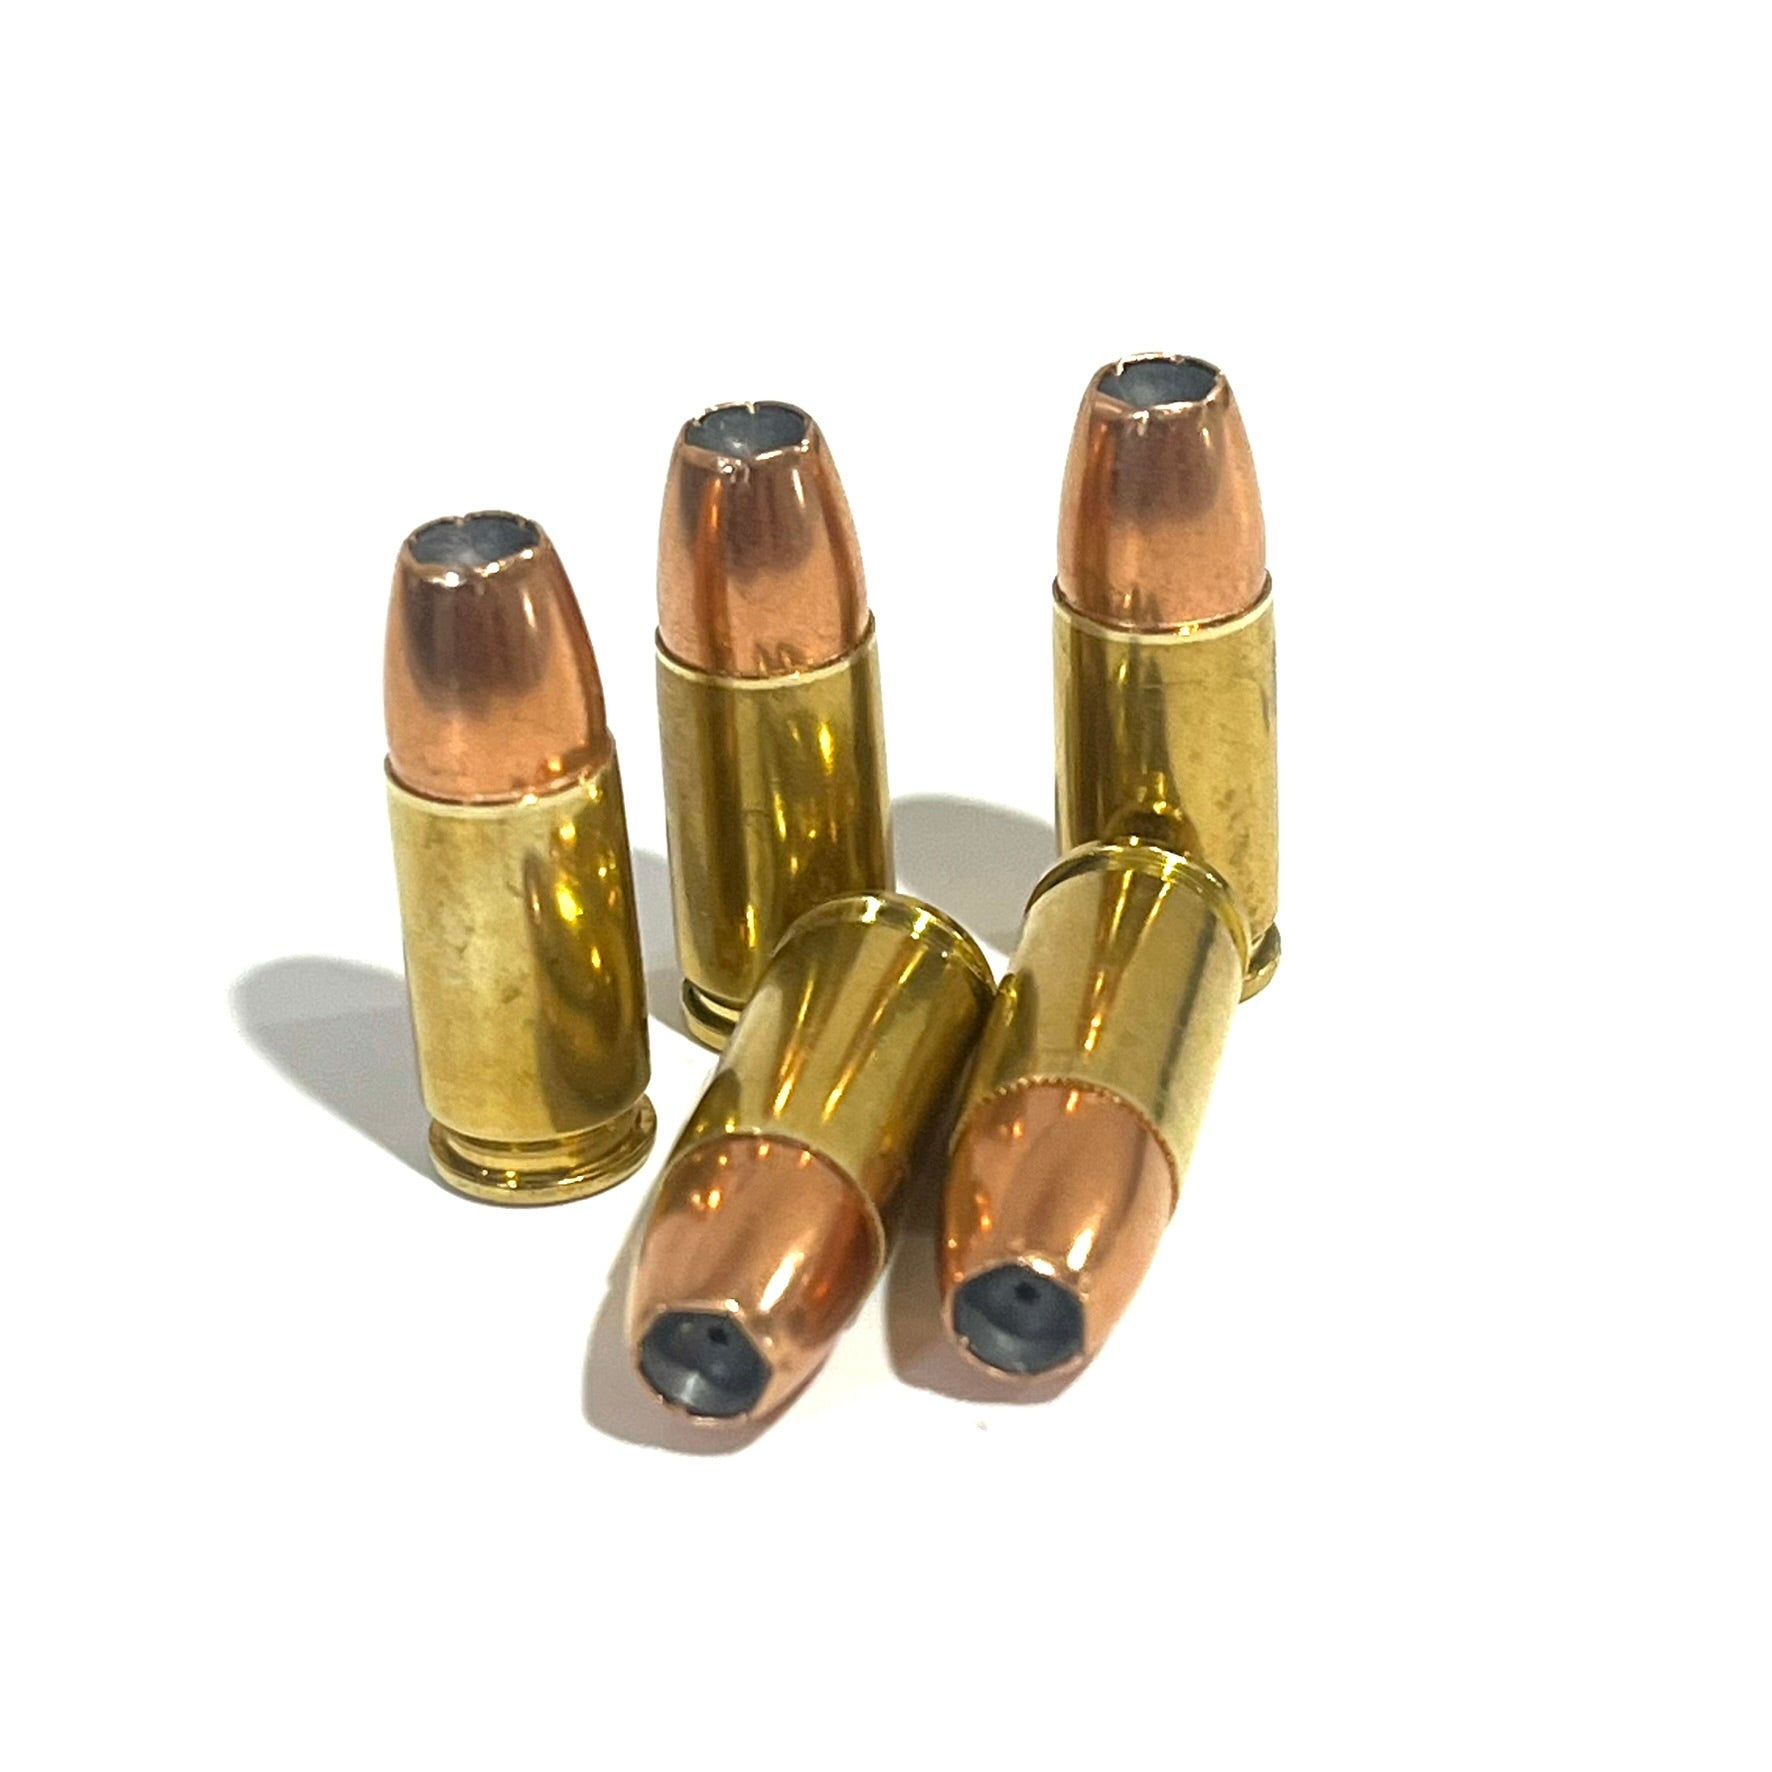 Dummy Rounds Polished .22 Brass Casings for Display - Free Shipping –